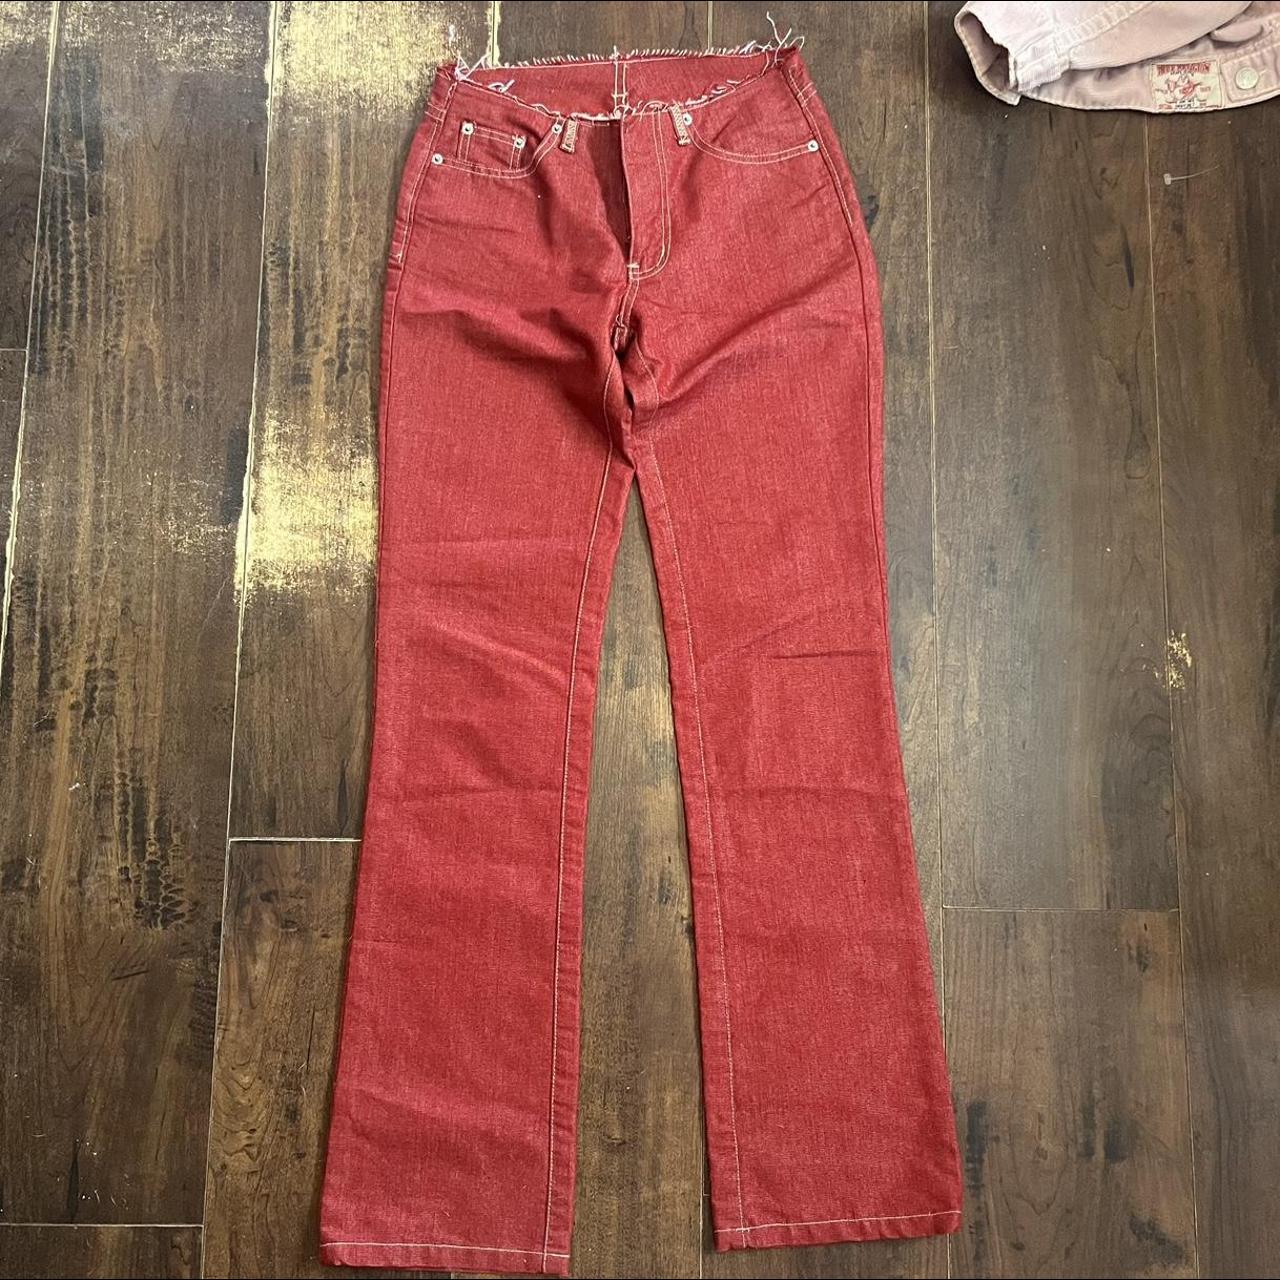 Pepe Jeans Women's Red Jeans